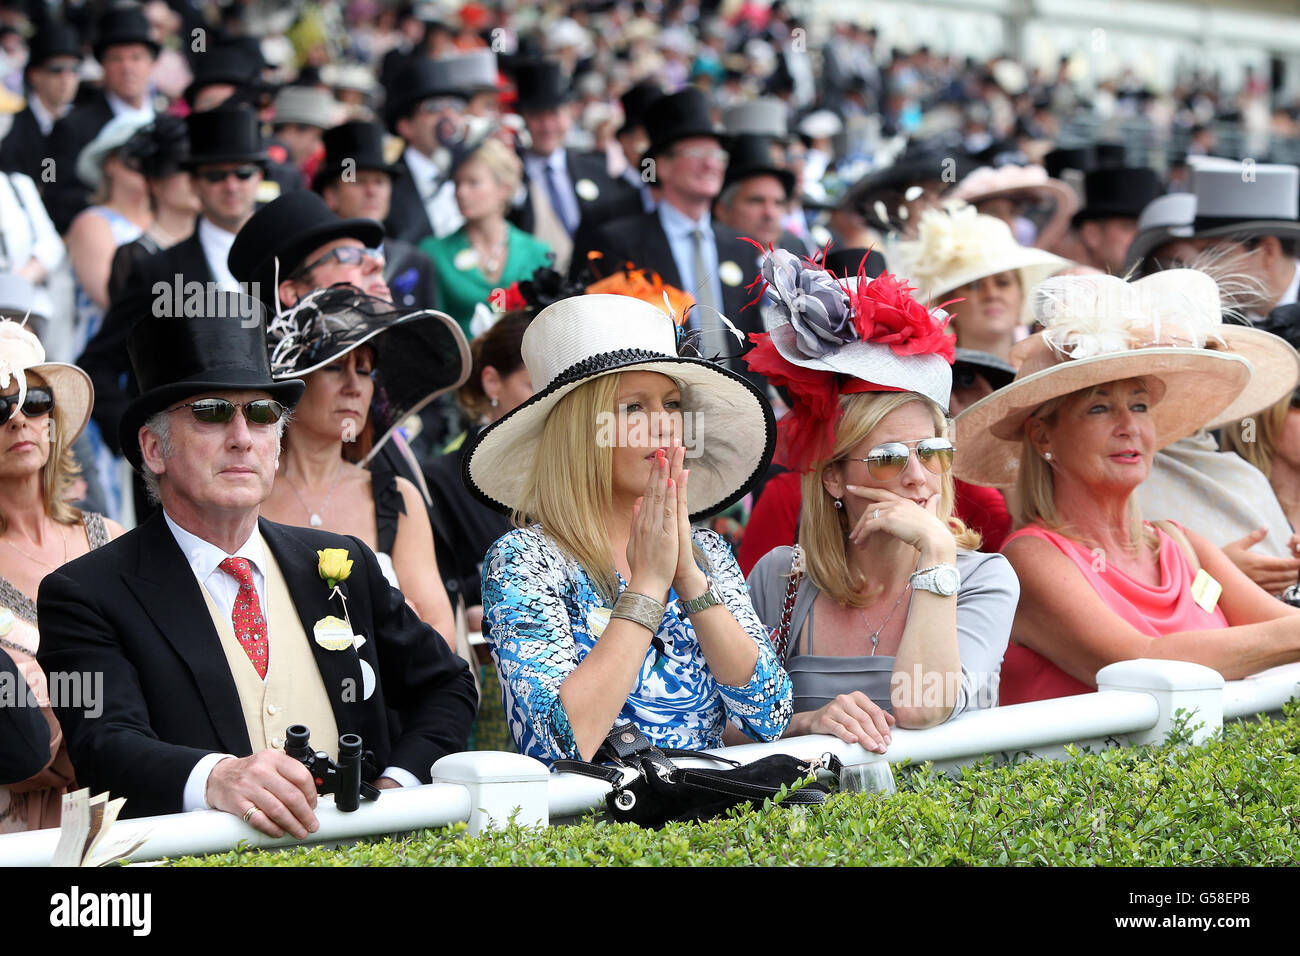 Horse Racing - The Royal Ascot Meeting 2012 - Day One - Ascot Racecourse. Race goers watch the Ascot Stakes during day one of the 2012 Royal Ascot meeting at Ascot Racecourse, Berkshire. Stock Photo